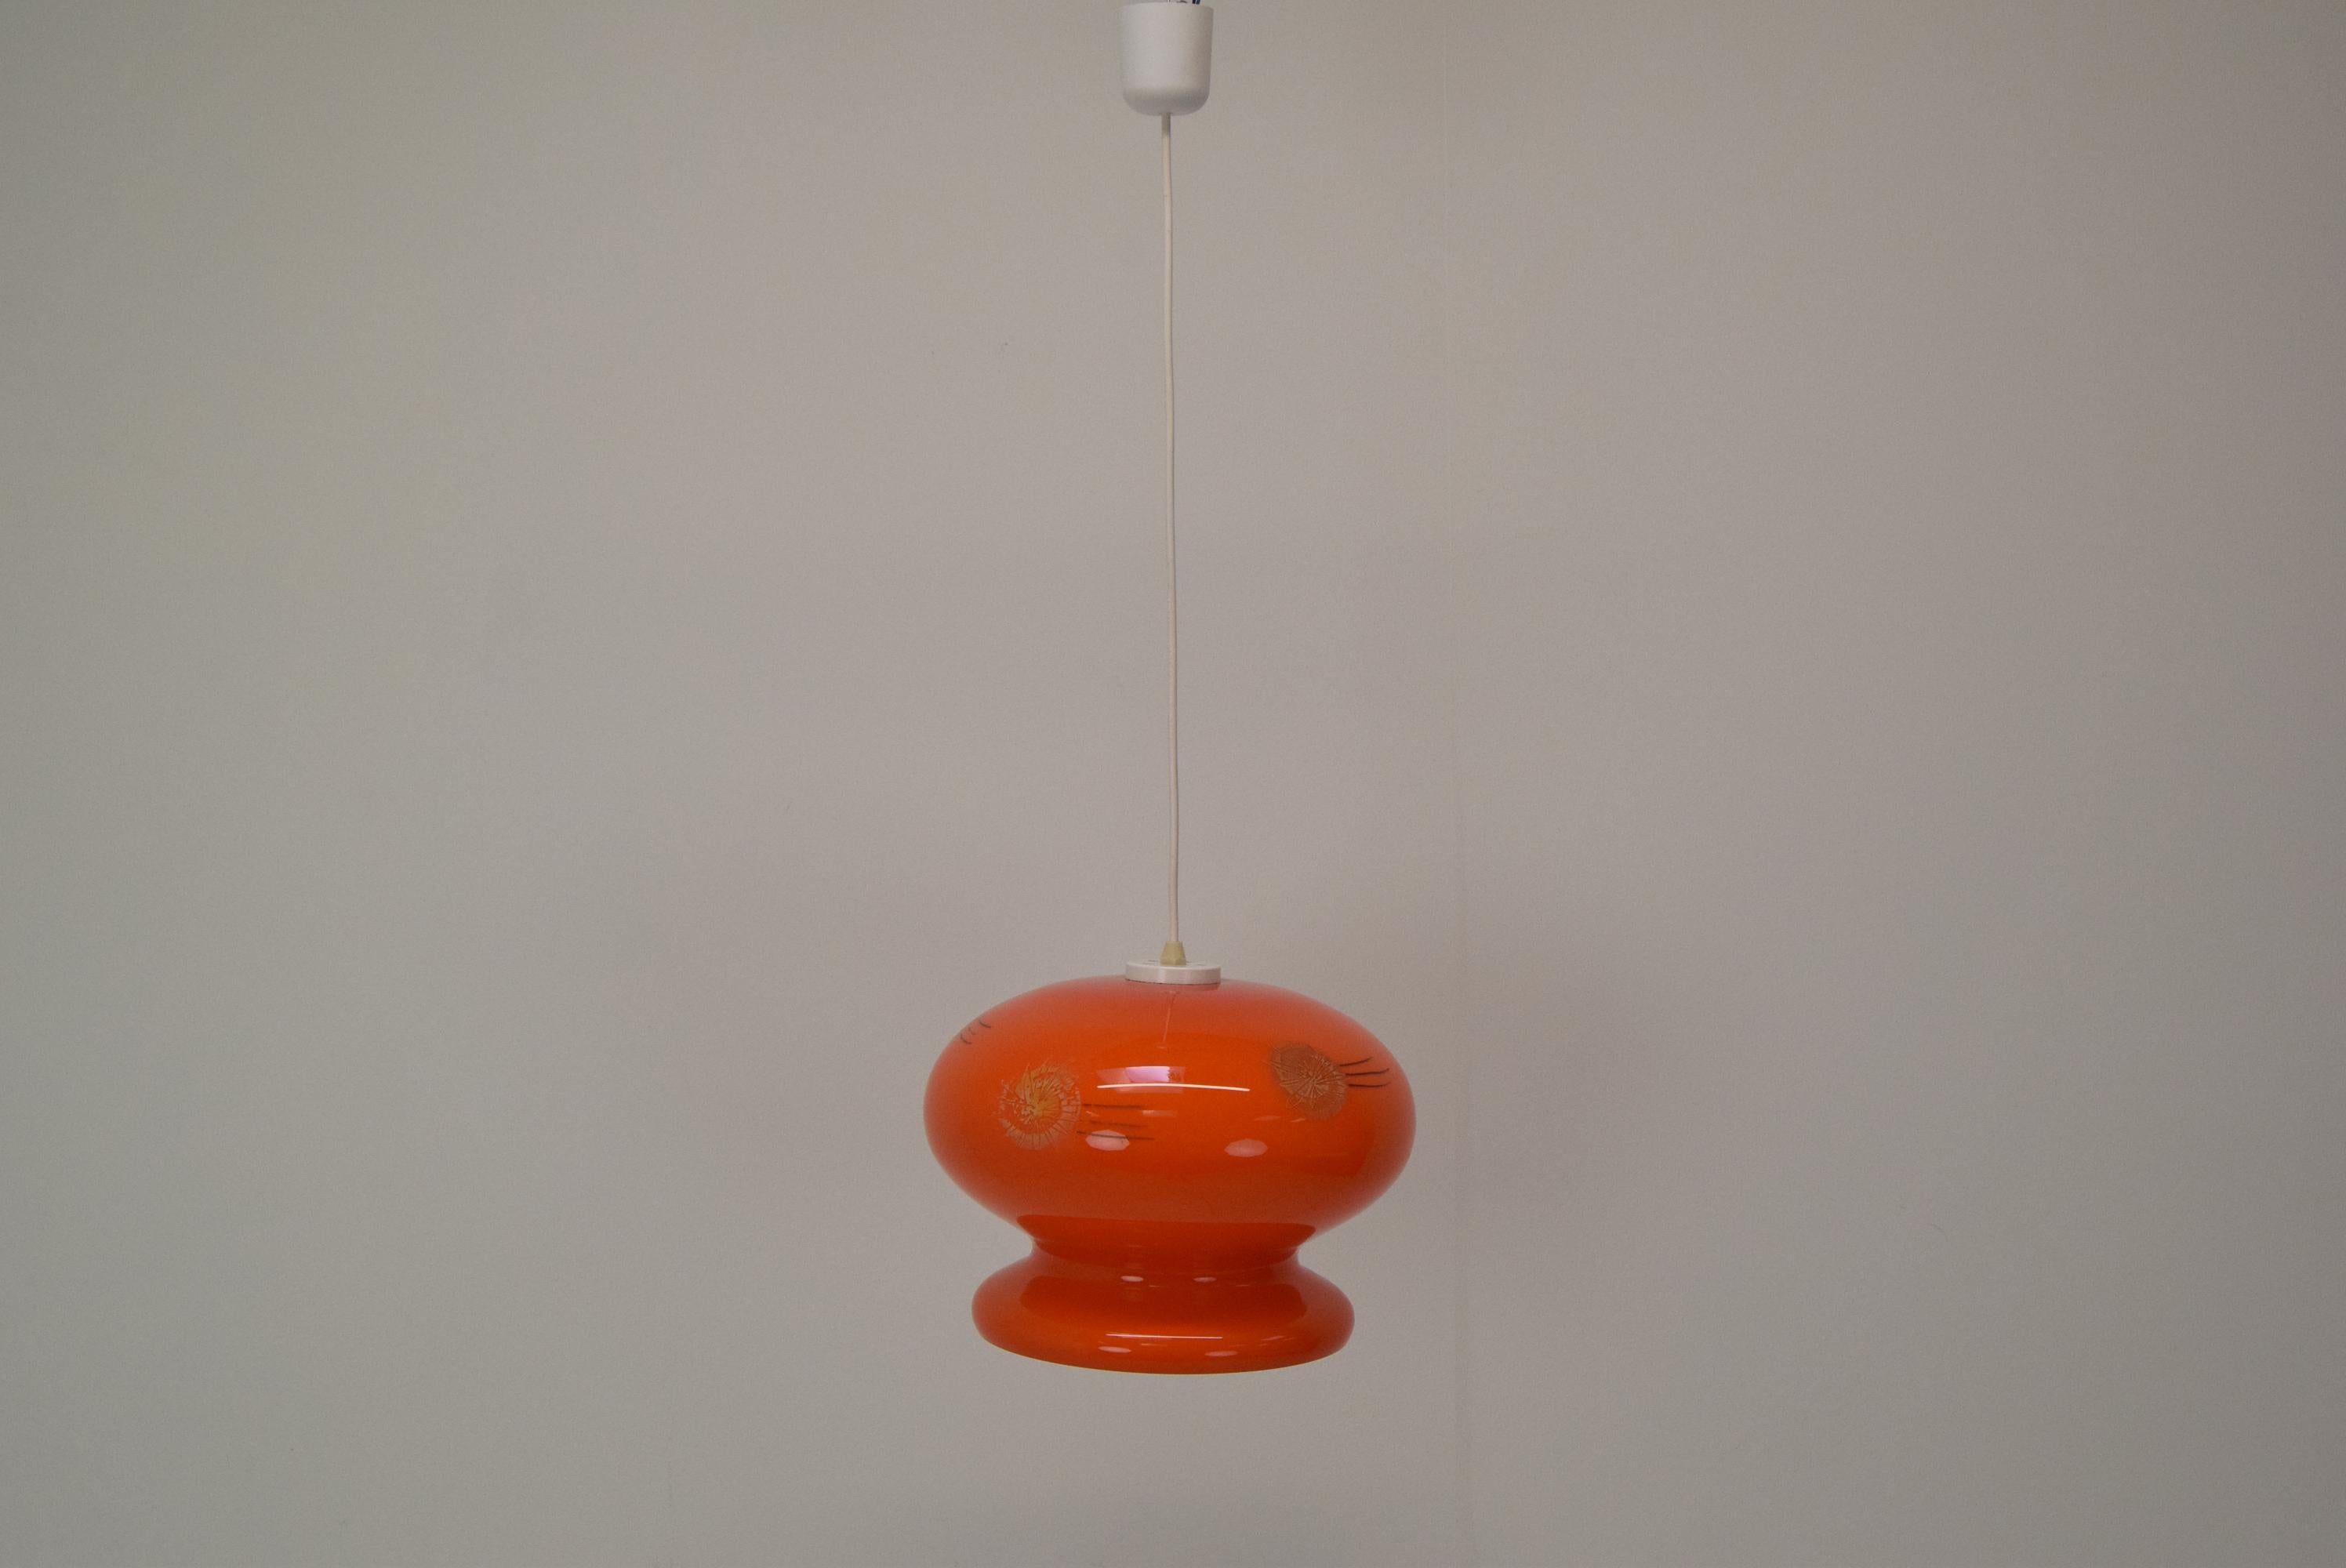 Czech Mid-century Glass Pendant, Designed by Stepan Tabery, 1960's.  For Sale